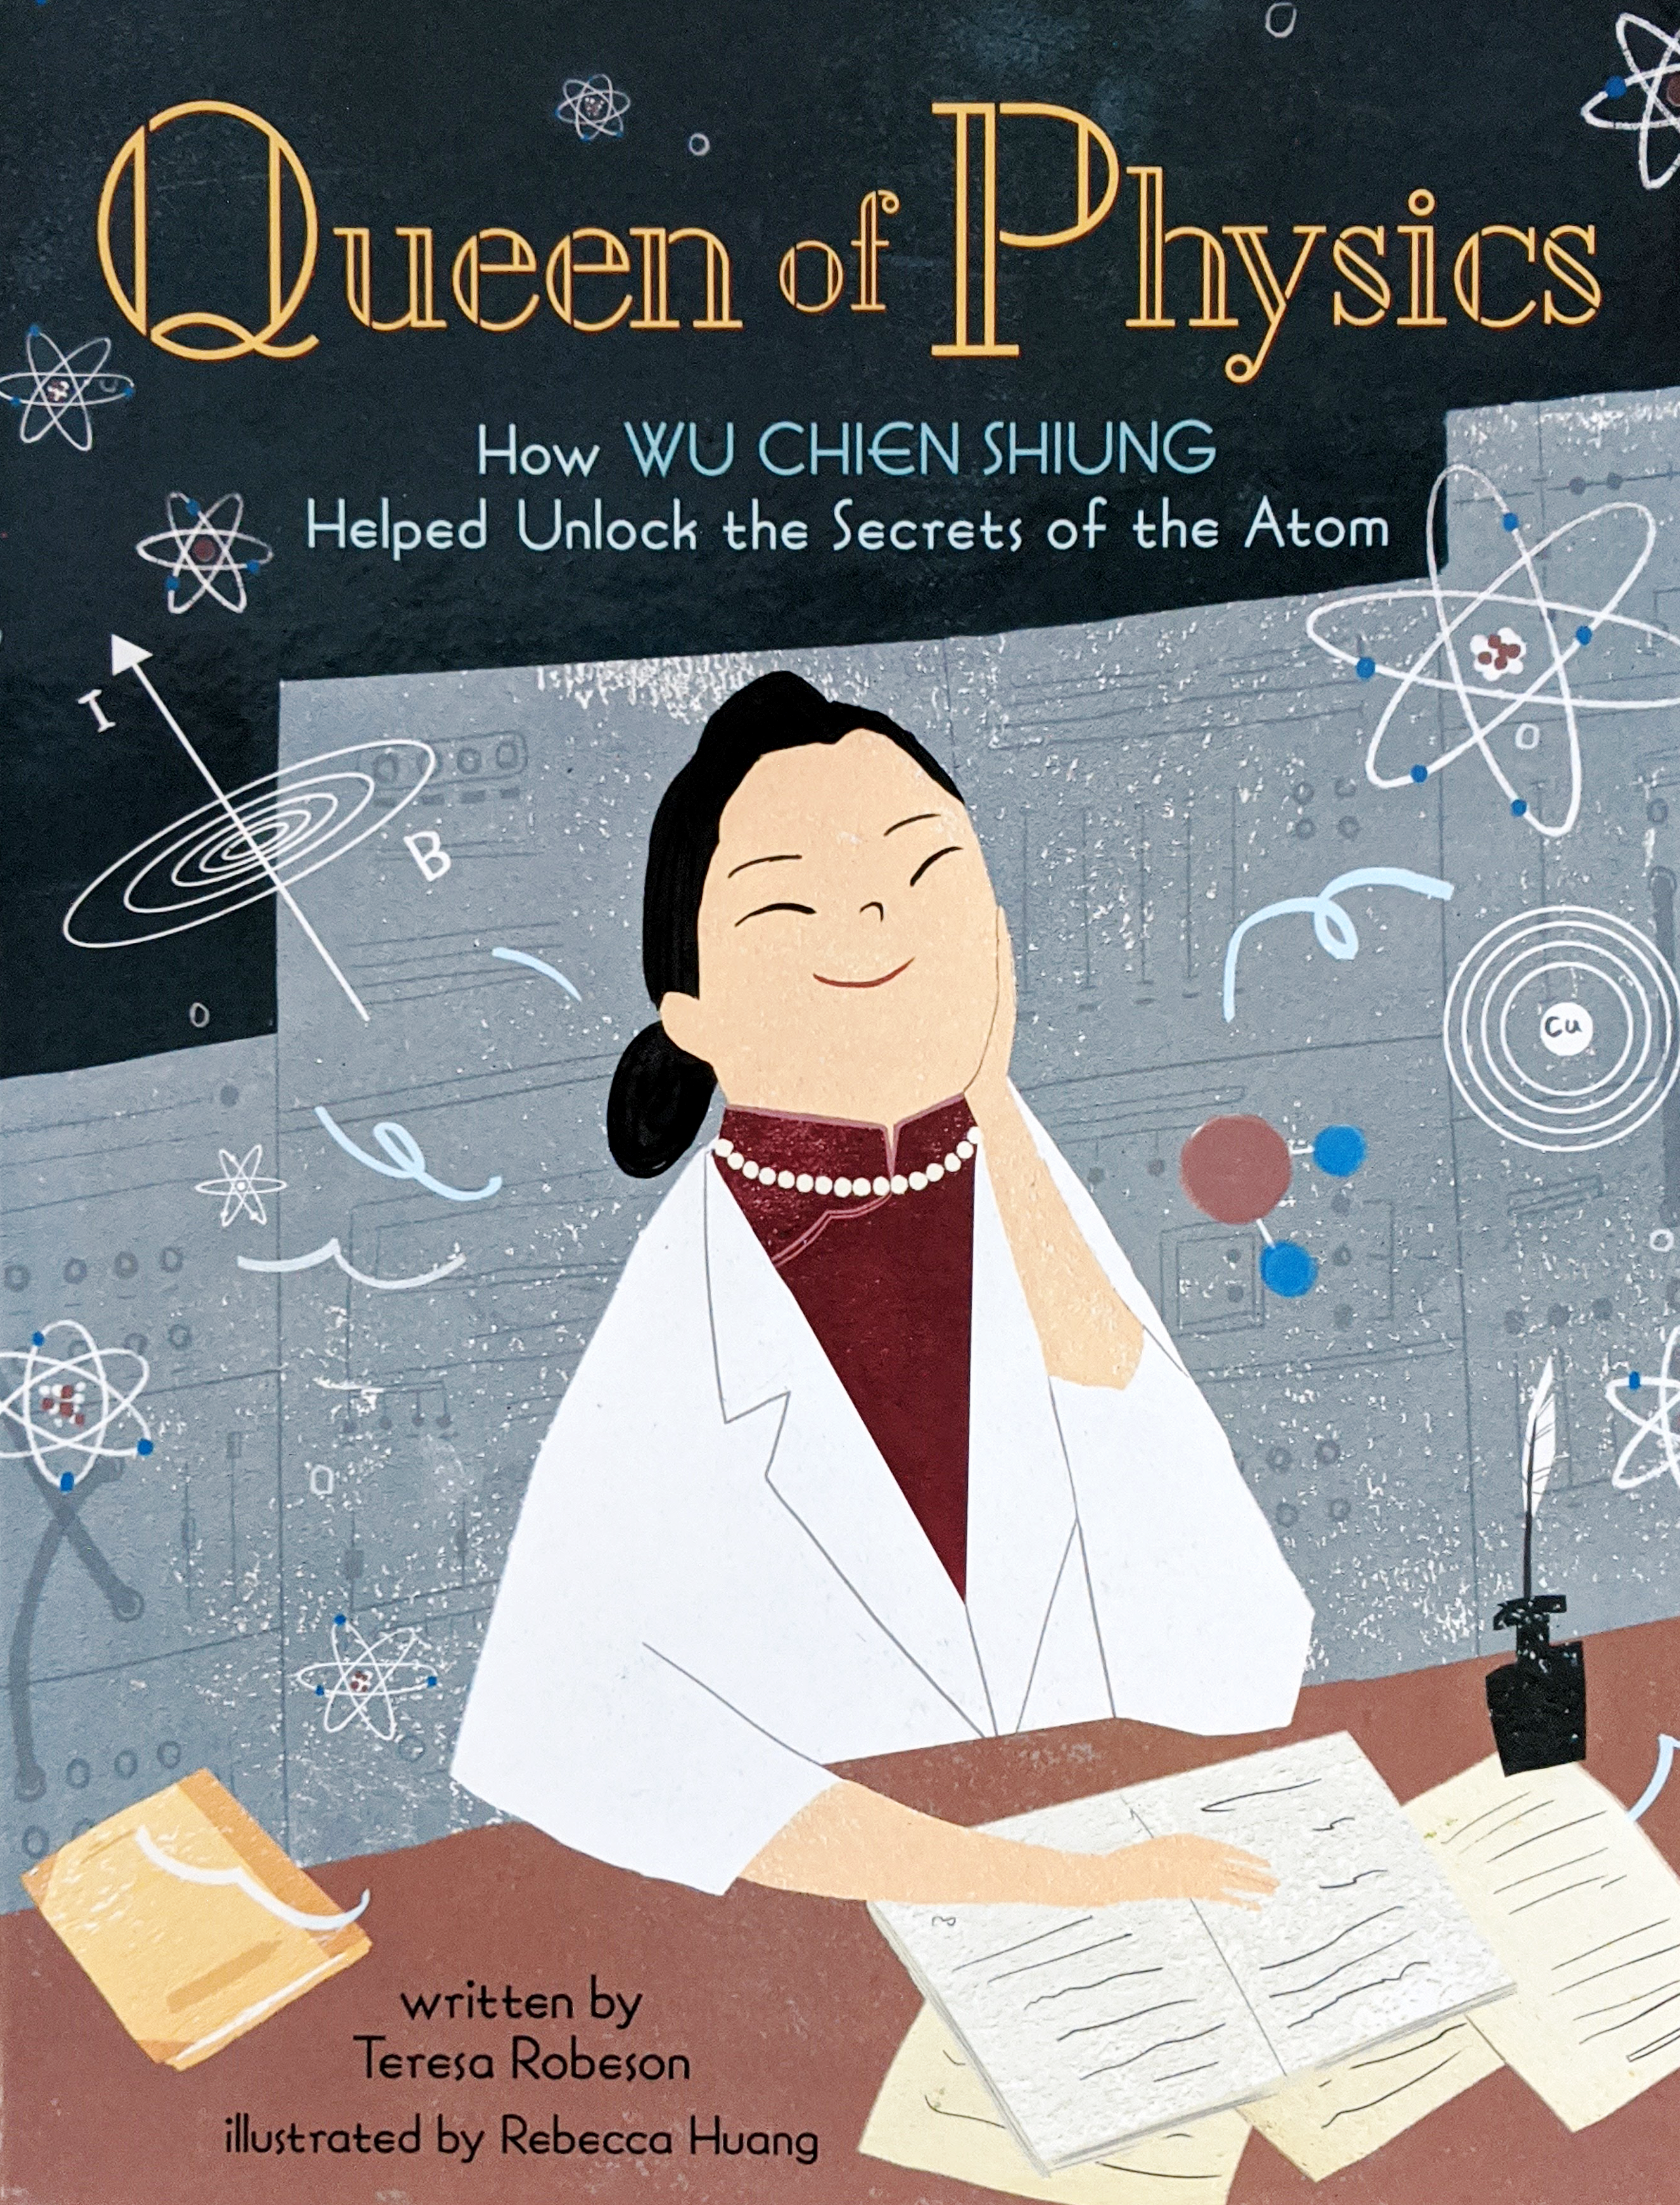 Queen of Physics: How Wu Chien Shiung Helped Unlock the Secrets of the Atom